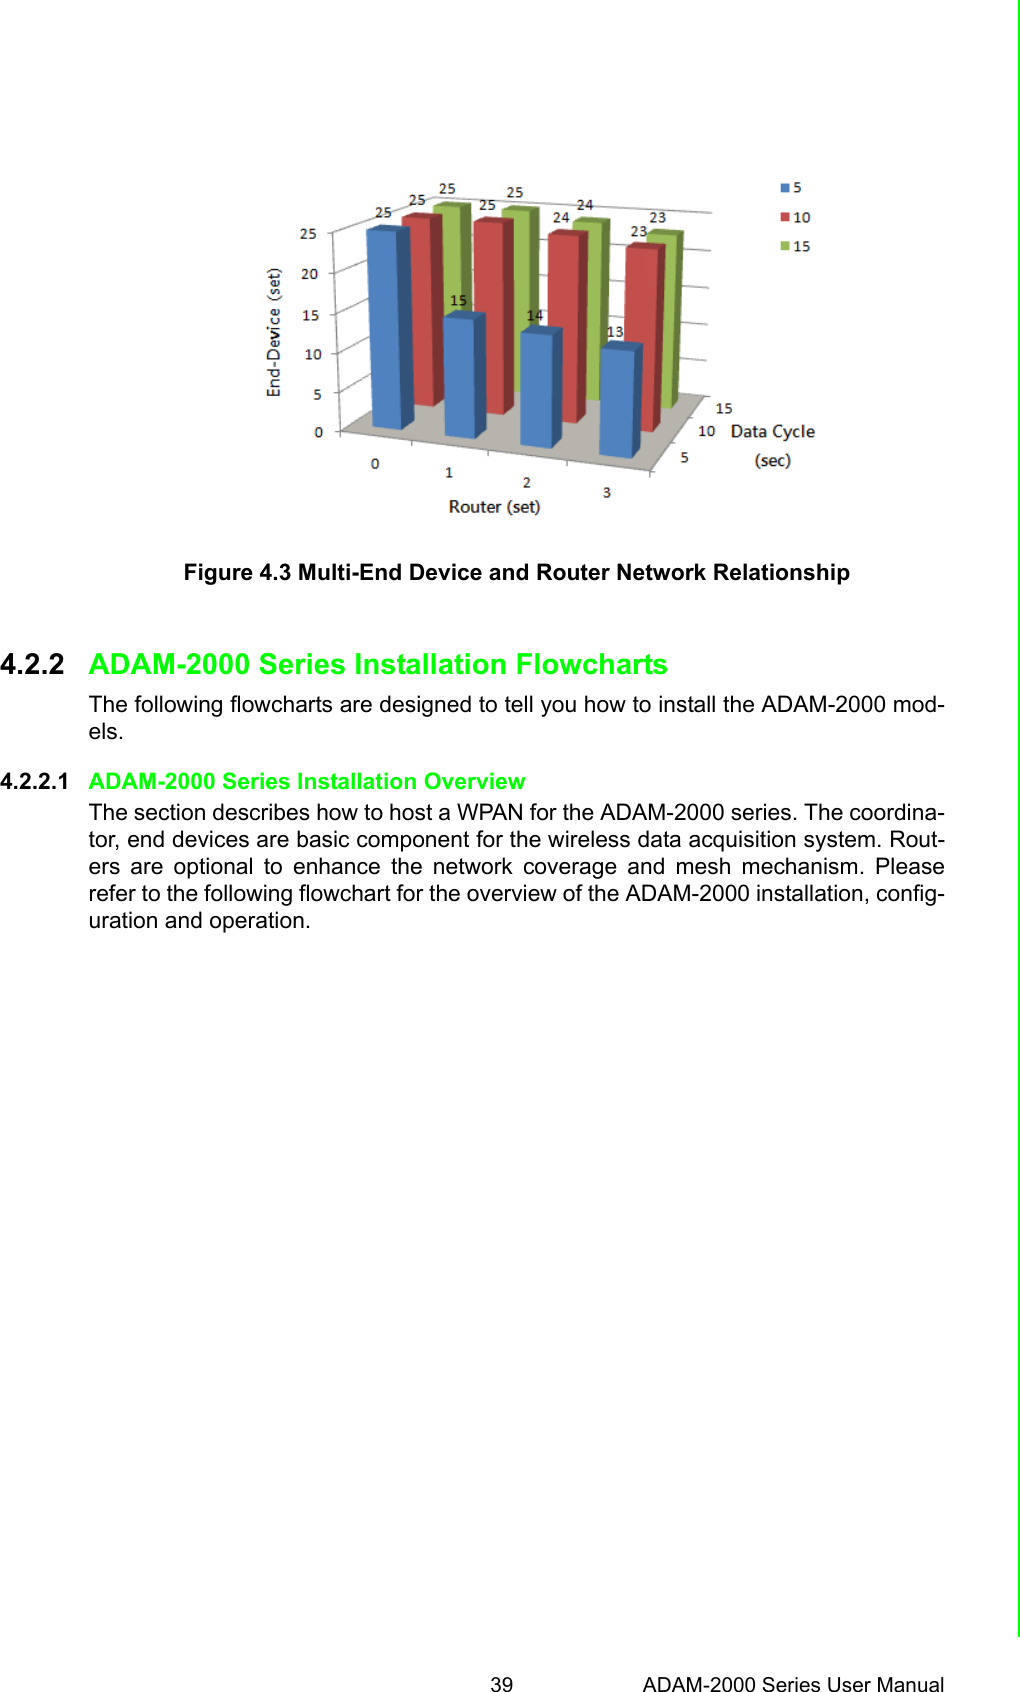 39 ADAM-2000 Series User ManualChapter 4 Installation GuideFigure 4.3 Multi-End Device and Router Network Relationship4.2.2 ADAM-2000 Series Installation FlowchartsThe following flowcharts are designed to tell you how to install the ADAM-2000 mod-els.4.2.2.1 ADAM-2000 Series Installation OverviewThe section describes how to host a WPAN for the ADAM-2000 series. The coordina-tor, end devices are basic component for the wireless data acquisition system. Rout-ers are optional to enhance the network coverage and mesh mechanism. Pleaserefer to the following flowchart for the overview of the ADAM-2000 installation, config-uration and operation.